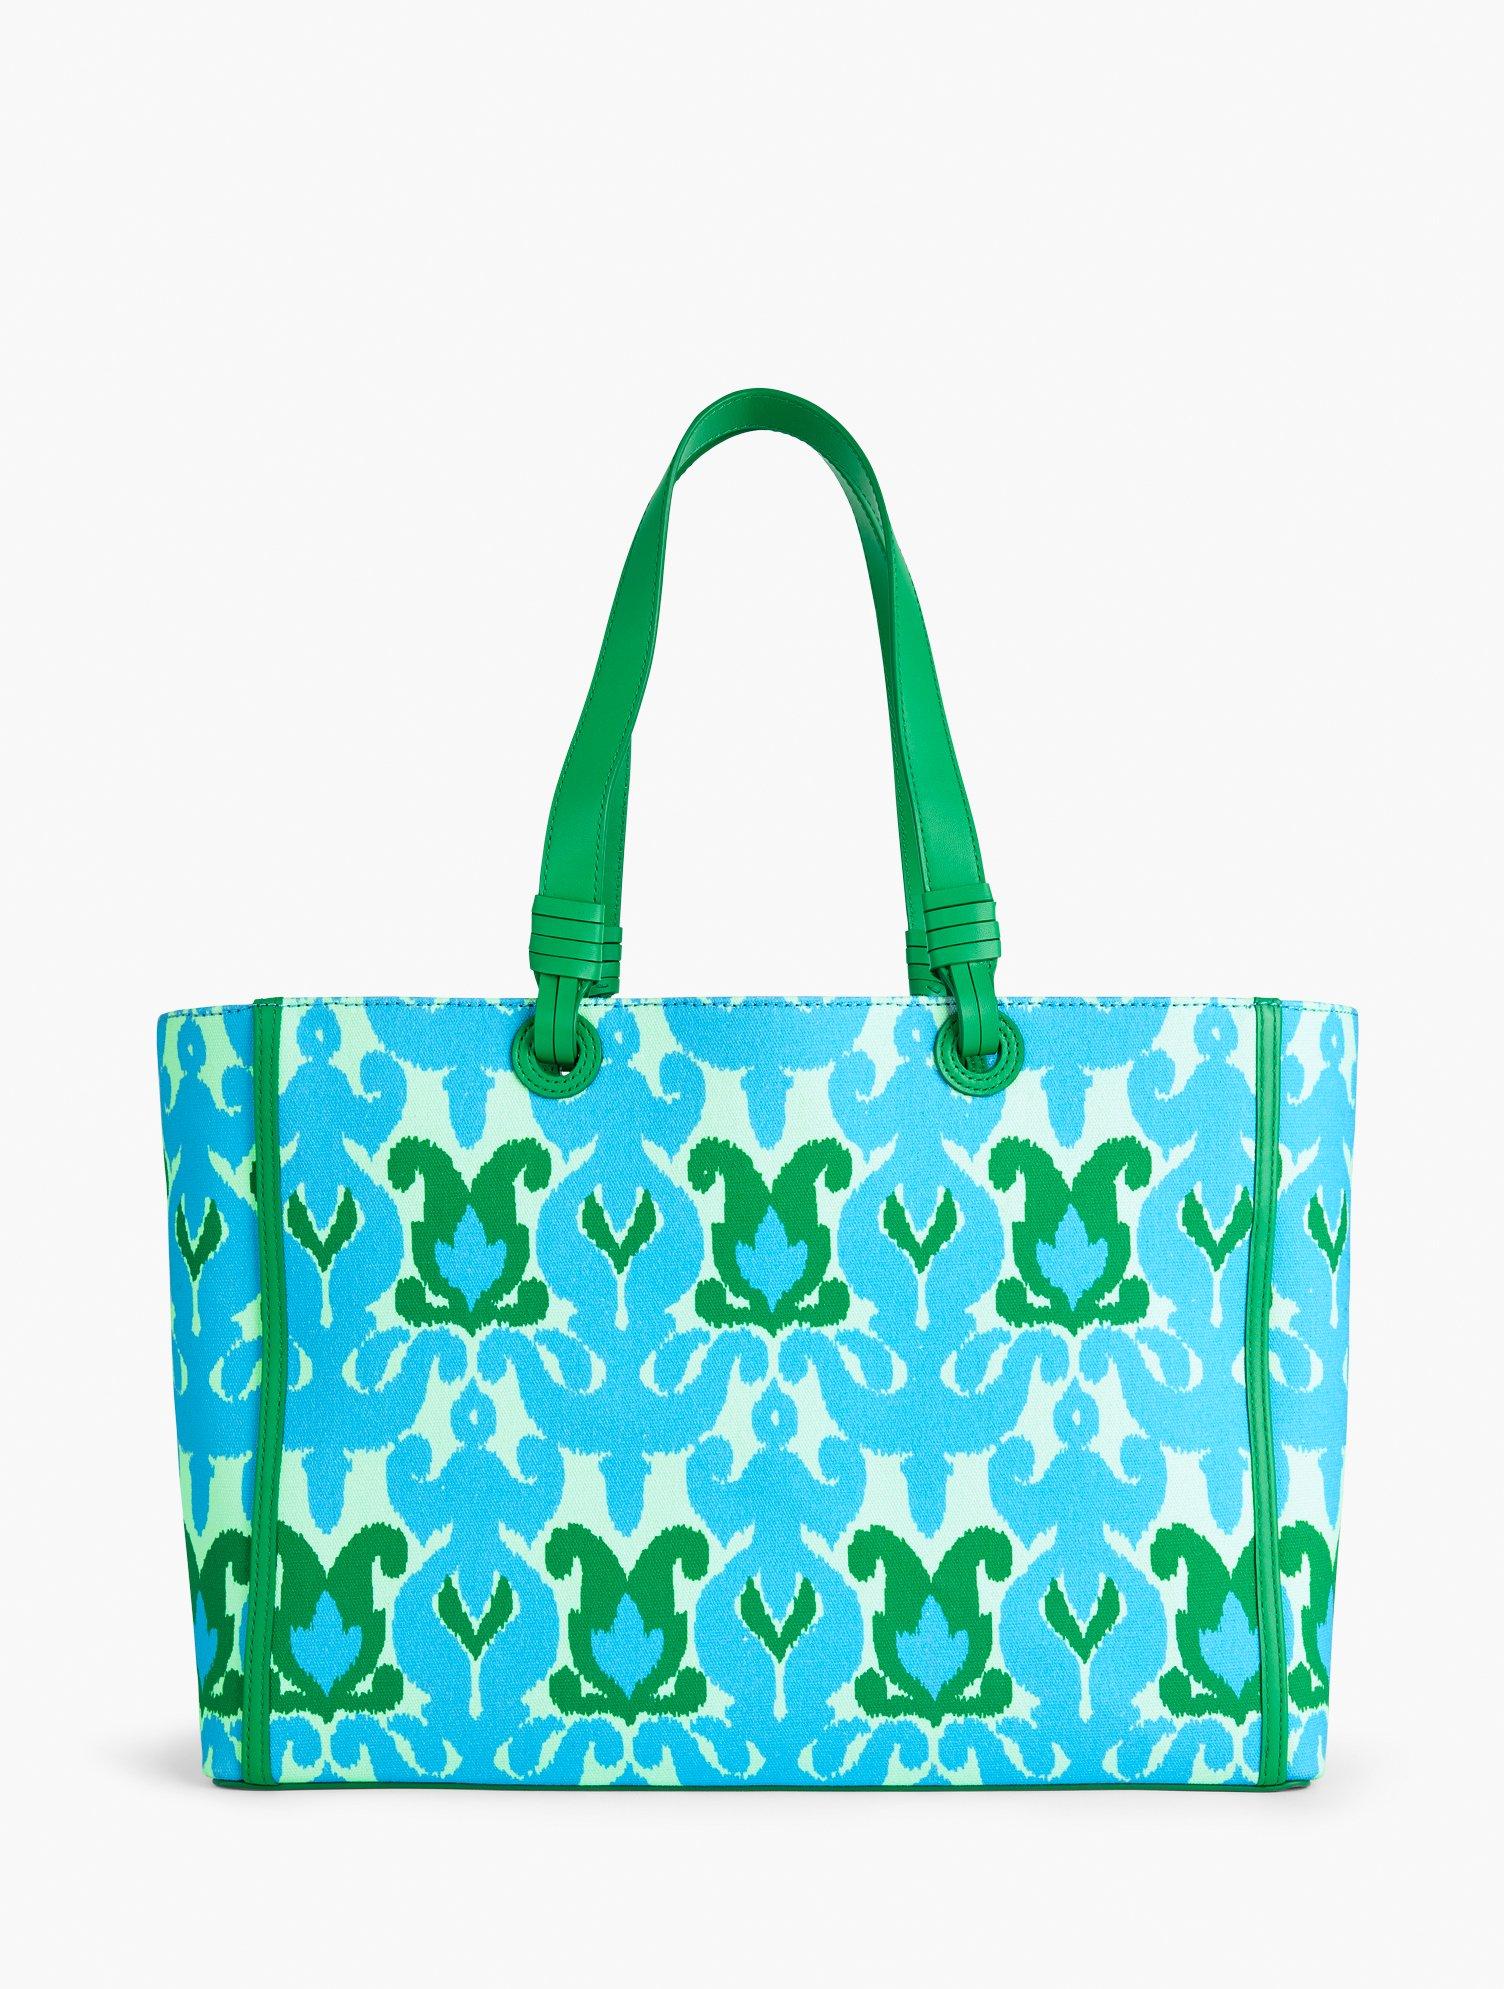 Talbots Ikat Medallion Canvas Tote in Blue